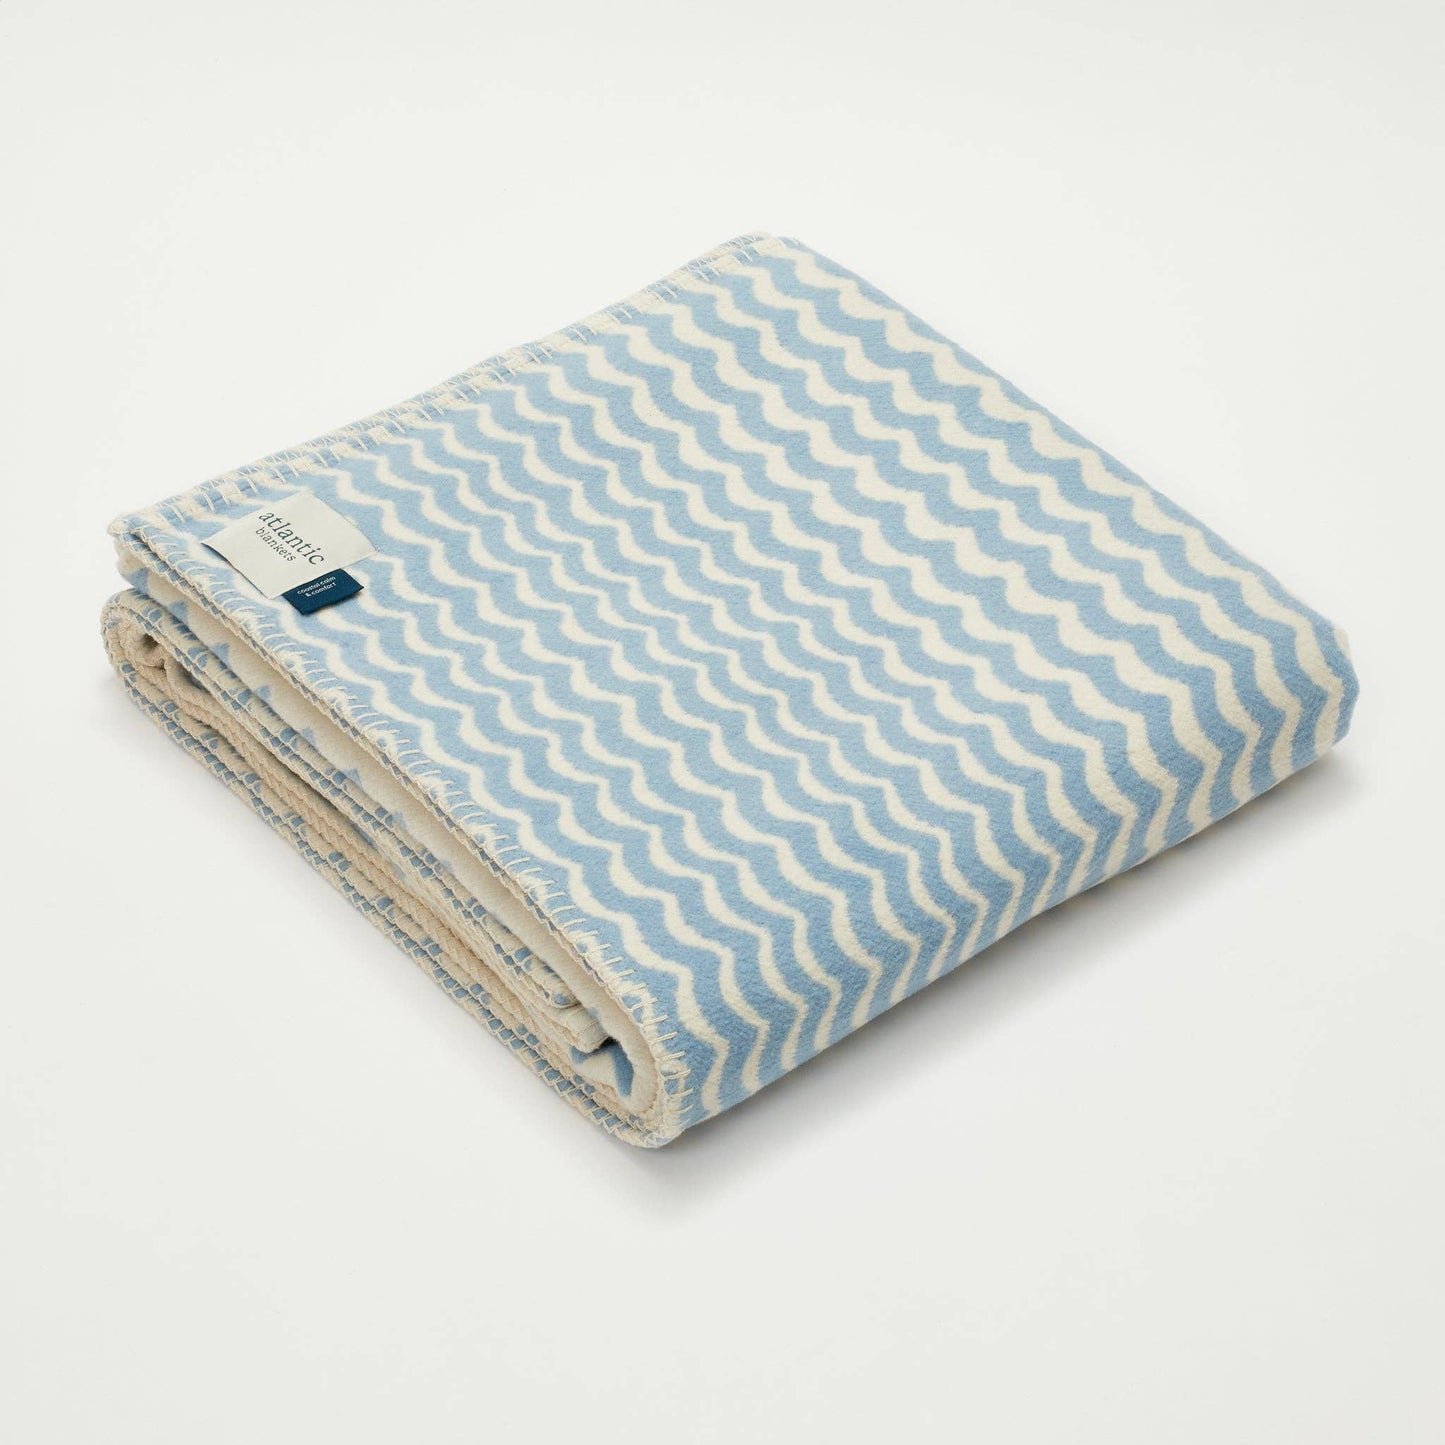 Atlantic Blankets - Powder Blue Swell Recycled Cotton Blanket - 160 x 110cm